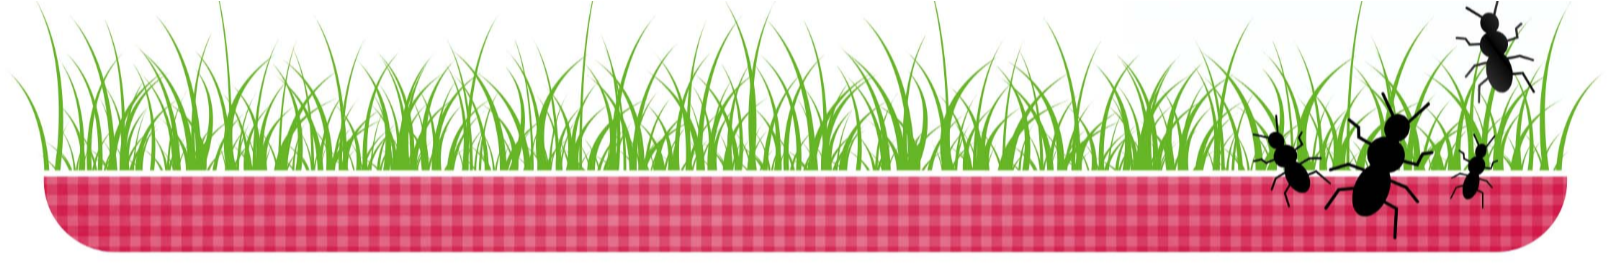 Grass, picnic tablecloth, and ants